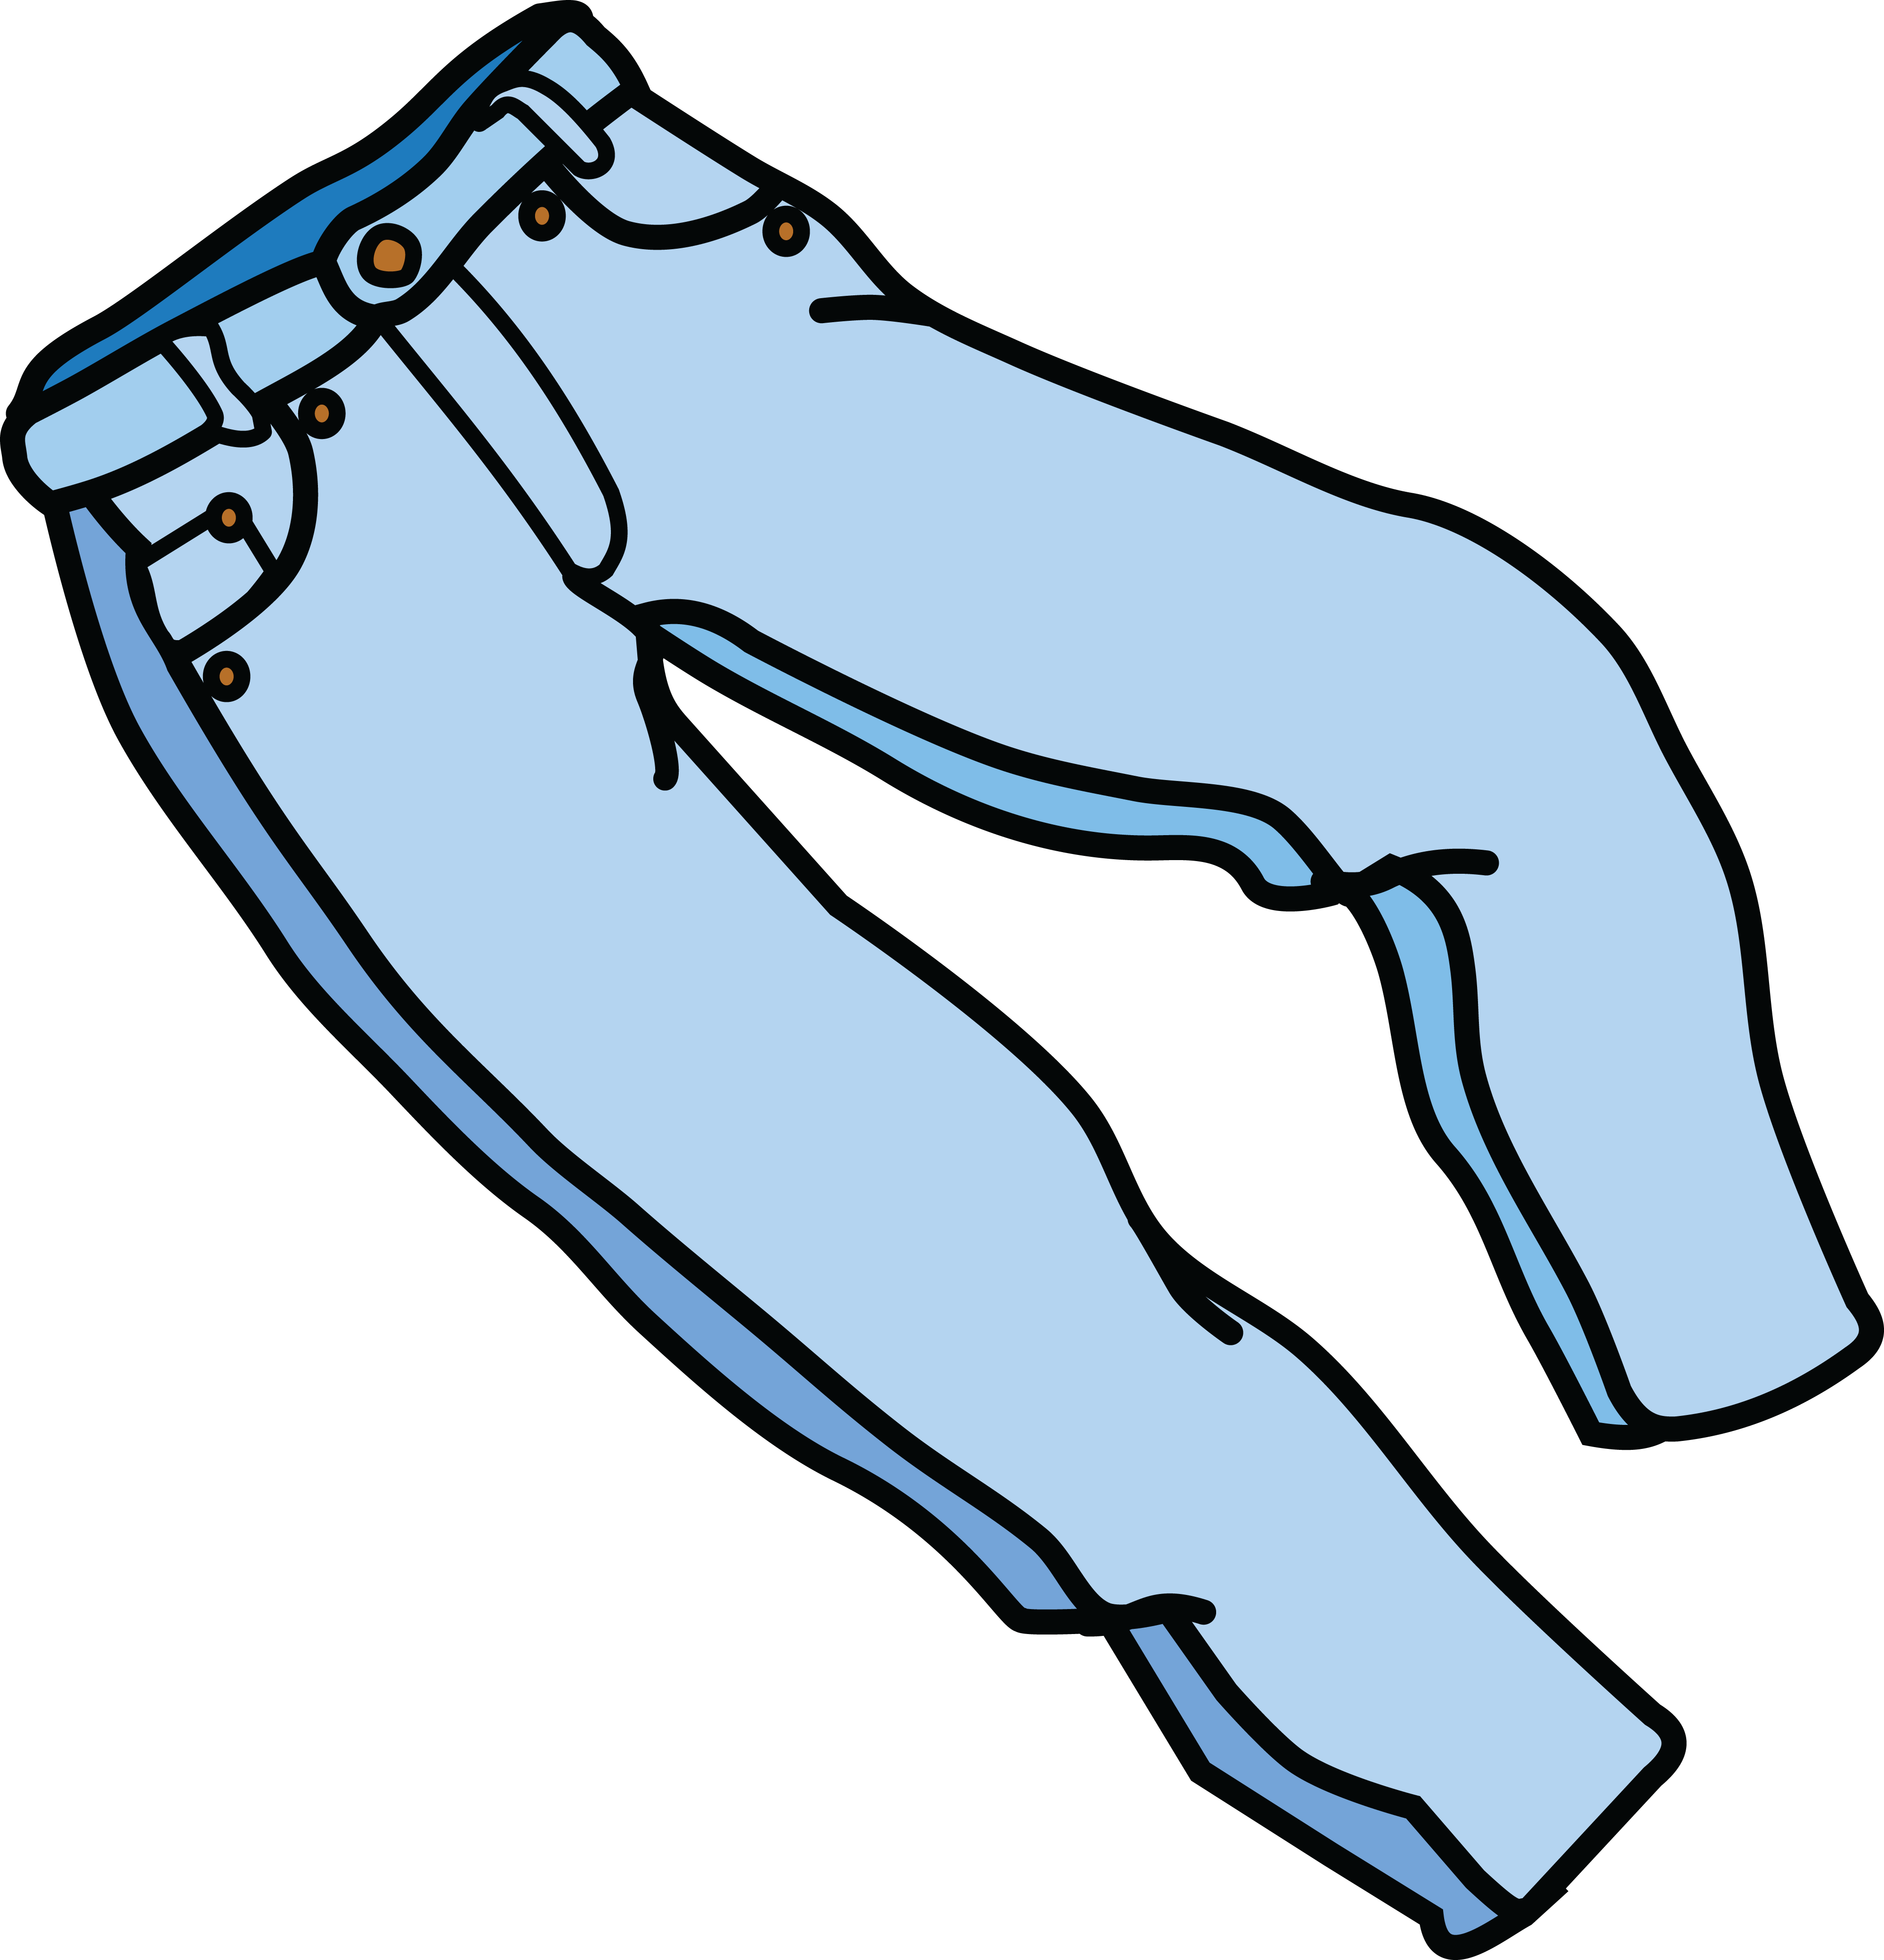 Free Clipart Of A pair of jeans #00011719 .